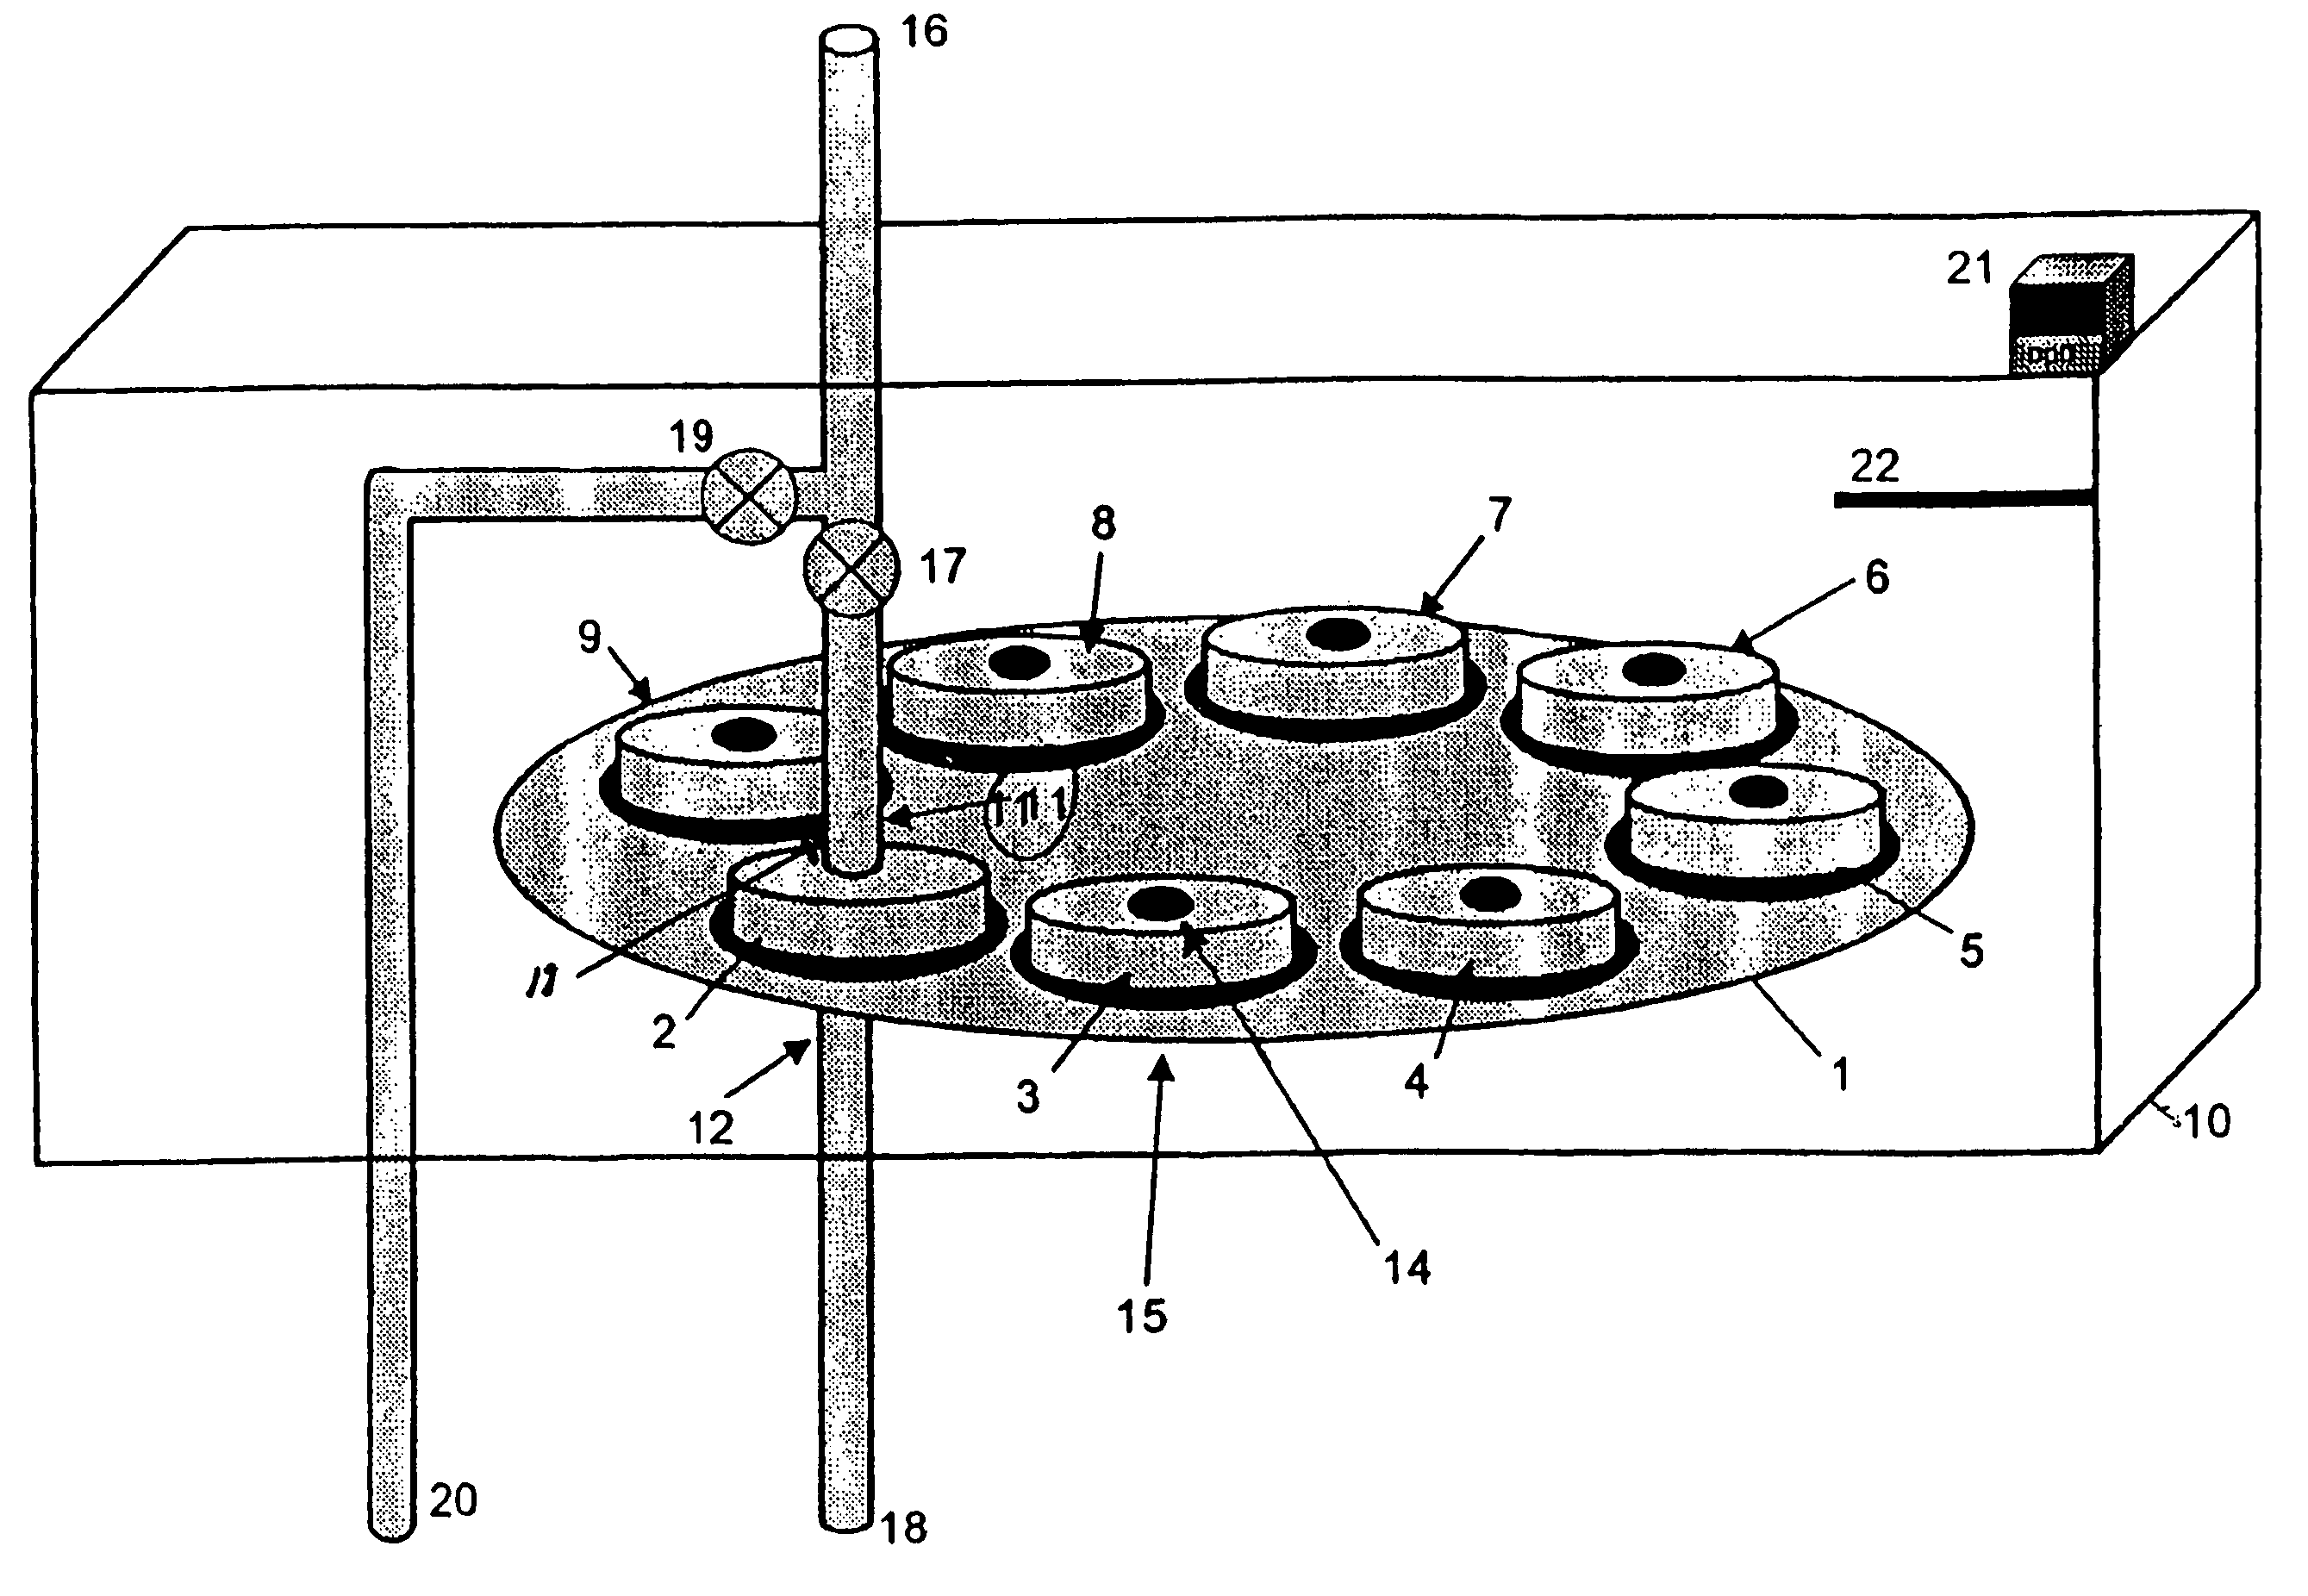 Apparatus and methods for use in concentration of gas and particle-laden gas flows